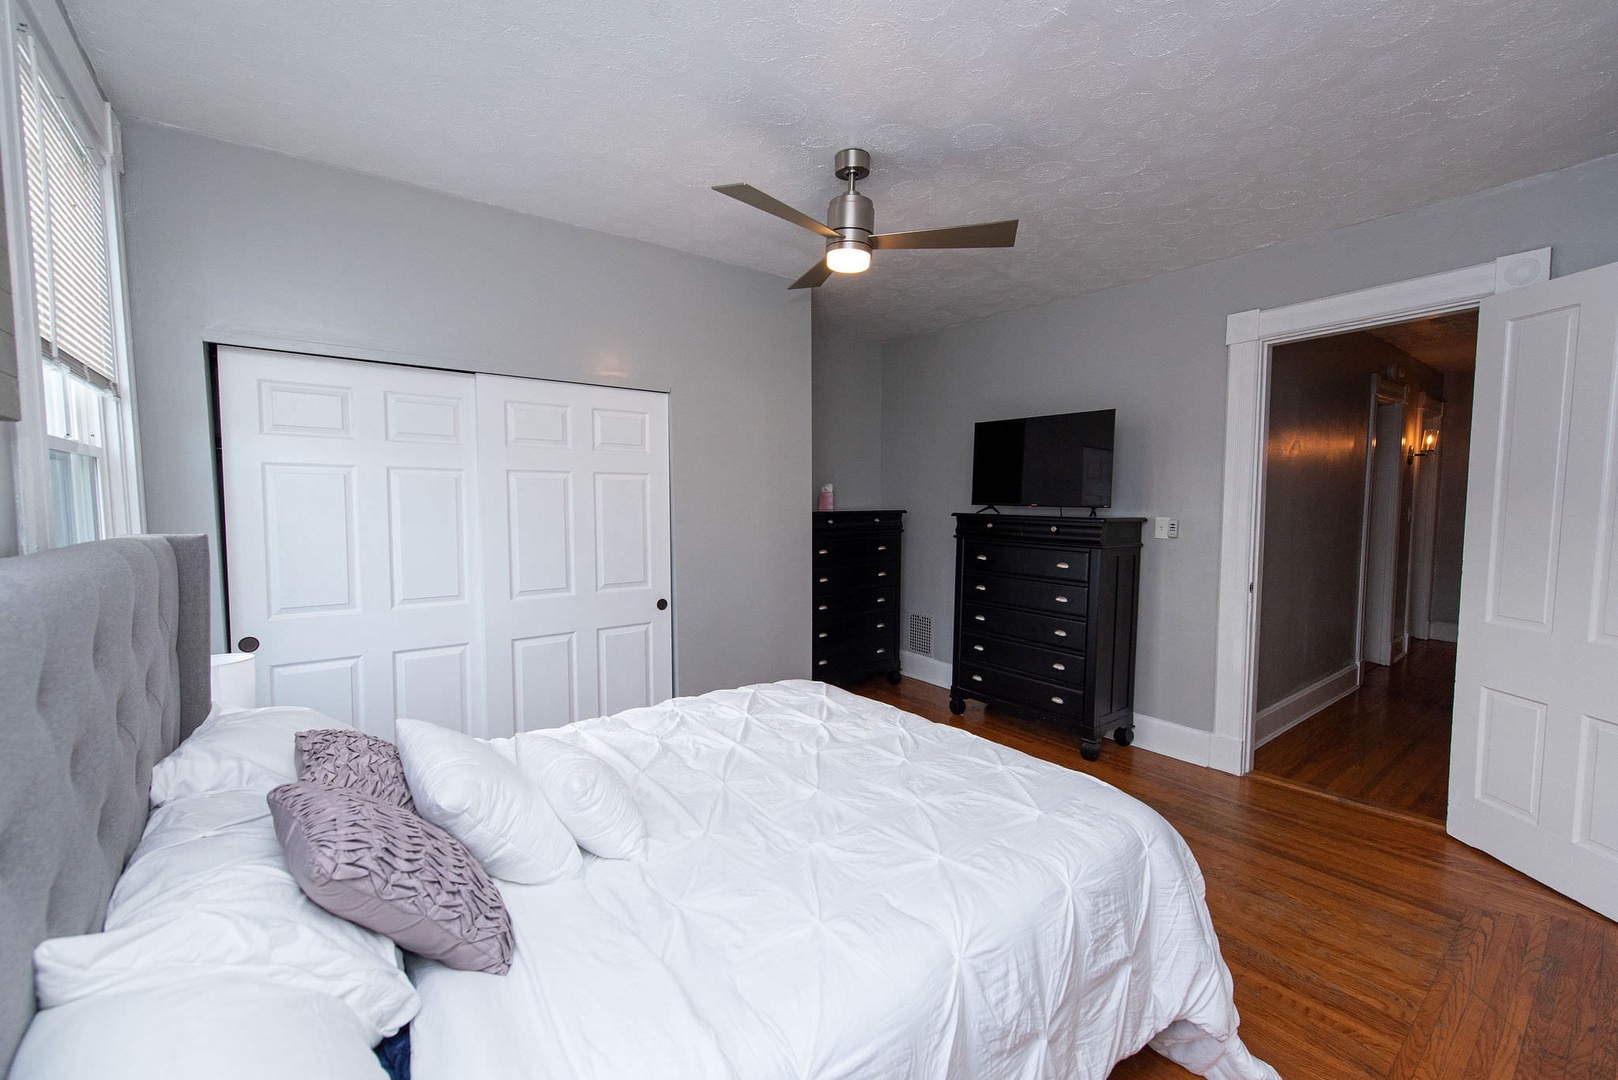 Suite 1 – The 1st of 3 bedrooms offers a queen bed, Smart TV, & ceiling fan